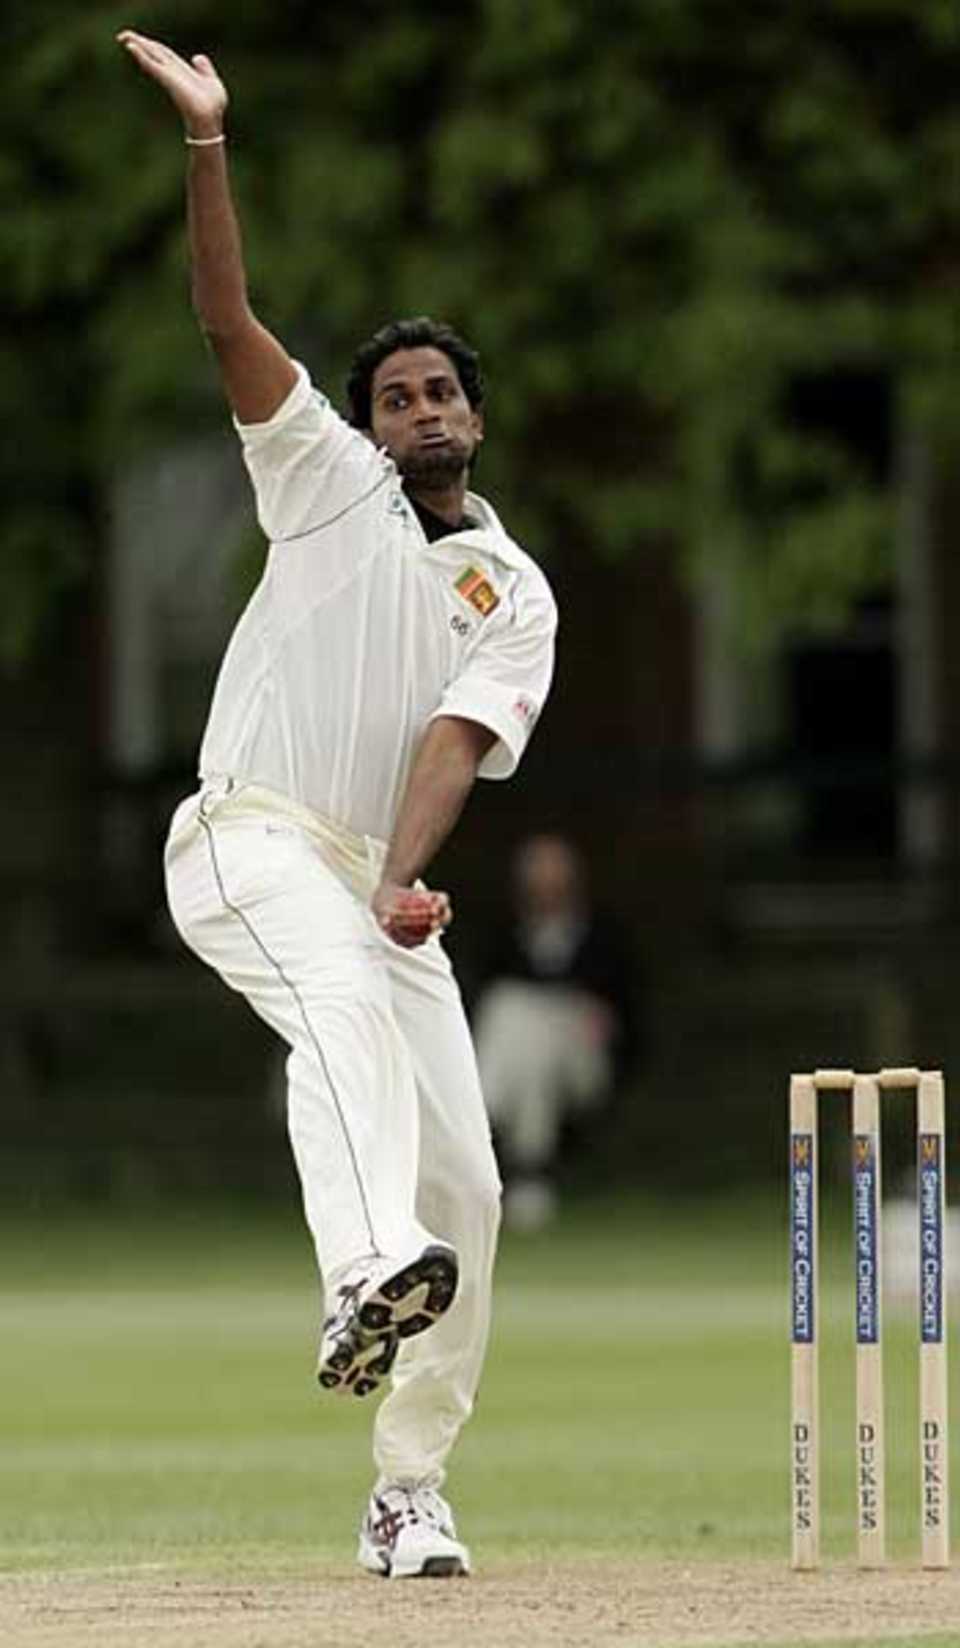 Nuwan Zoysa in his delivery stride